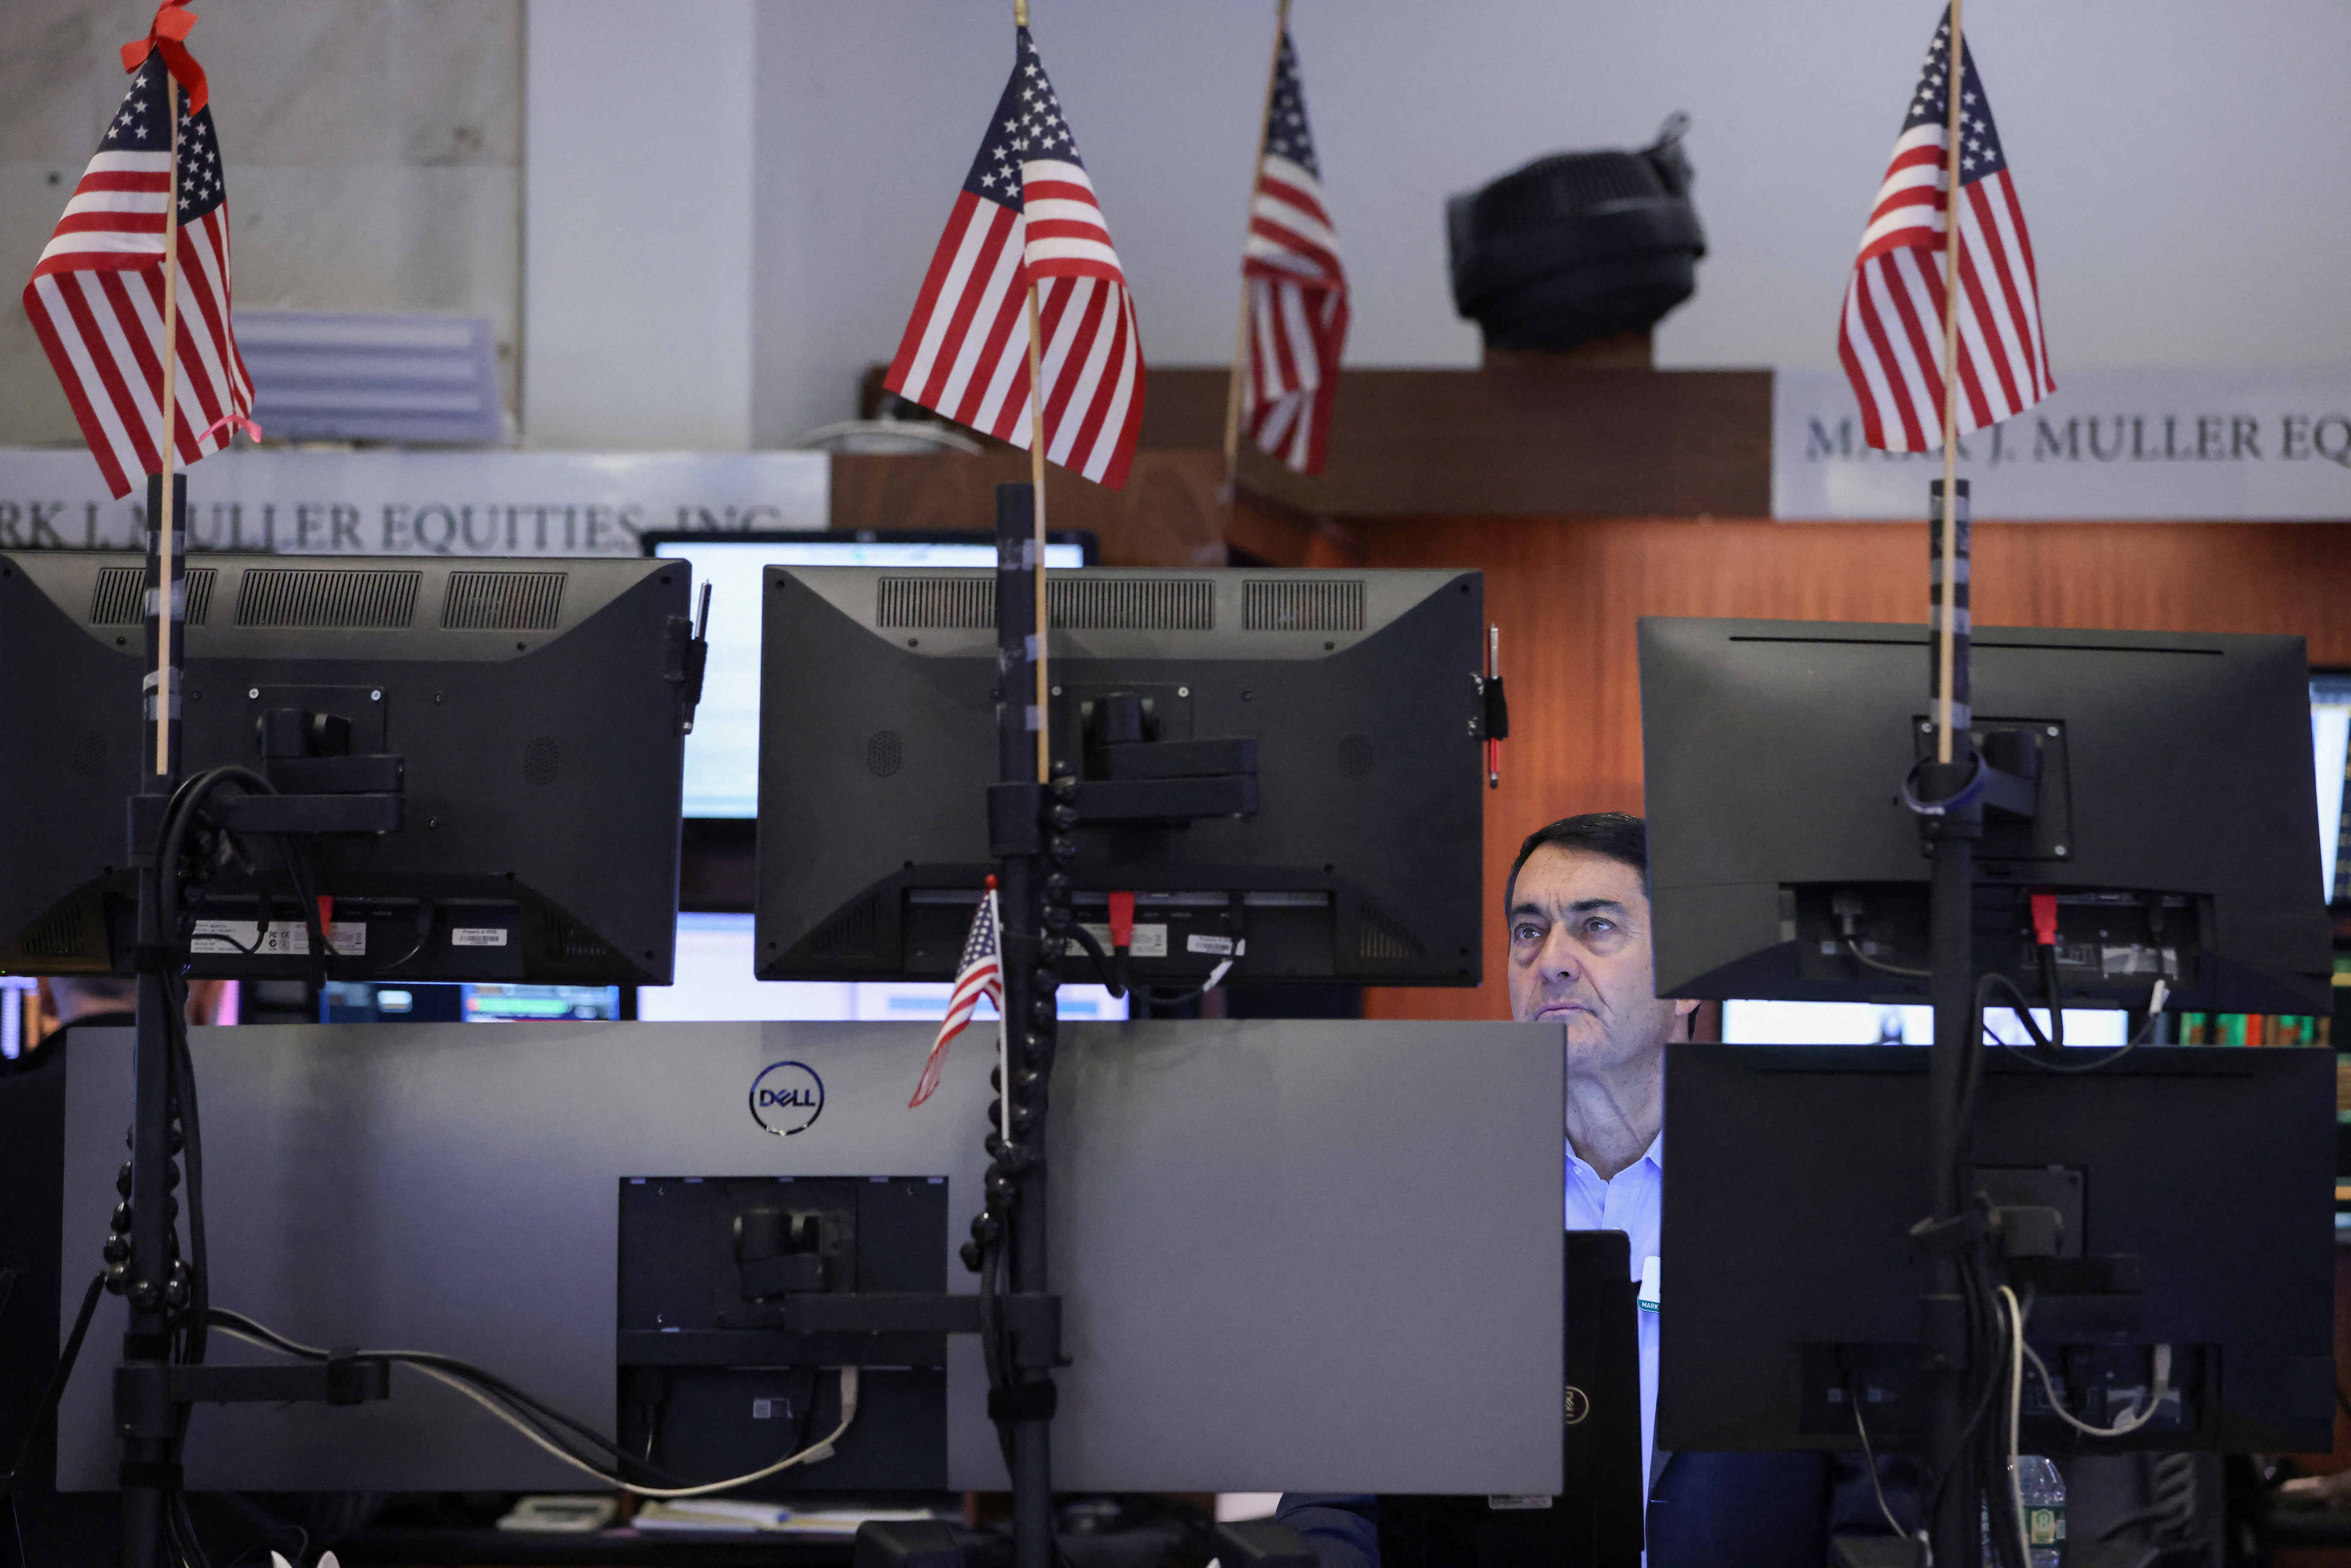 A trader works on the trading floor at the New York Stock Exchange (NYSE) in New York City